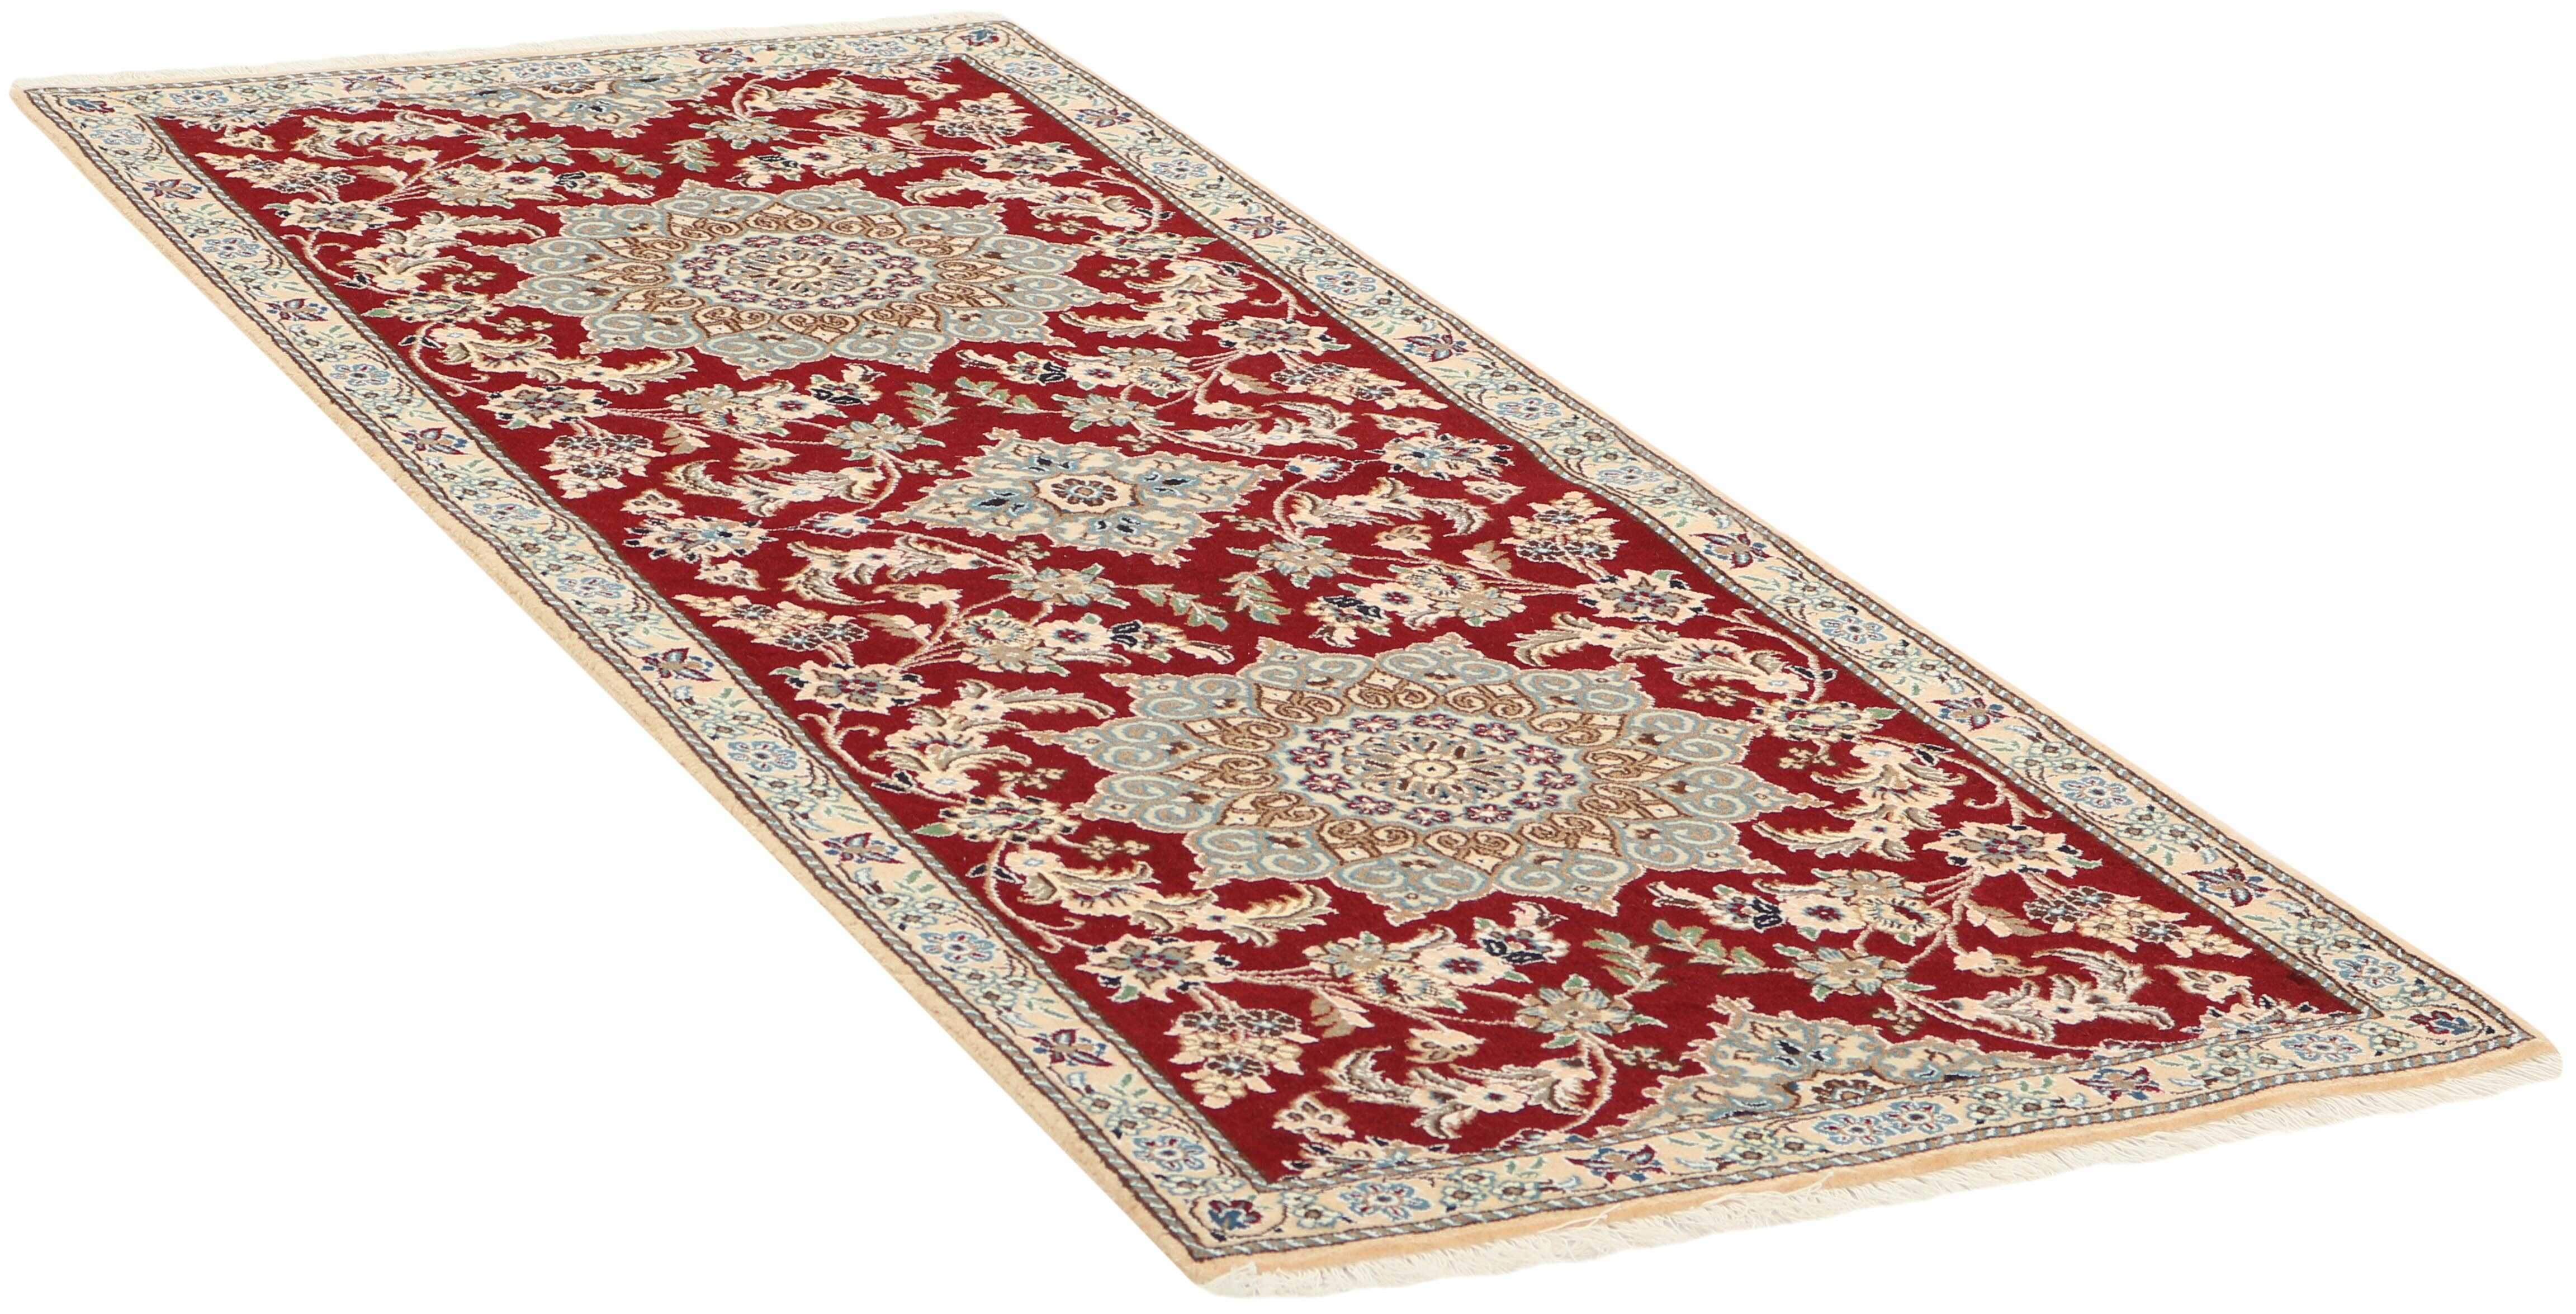 Authentic oriental runner with traditional floral design in red